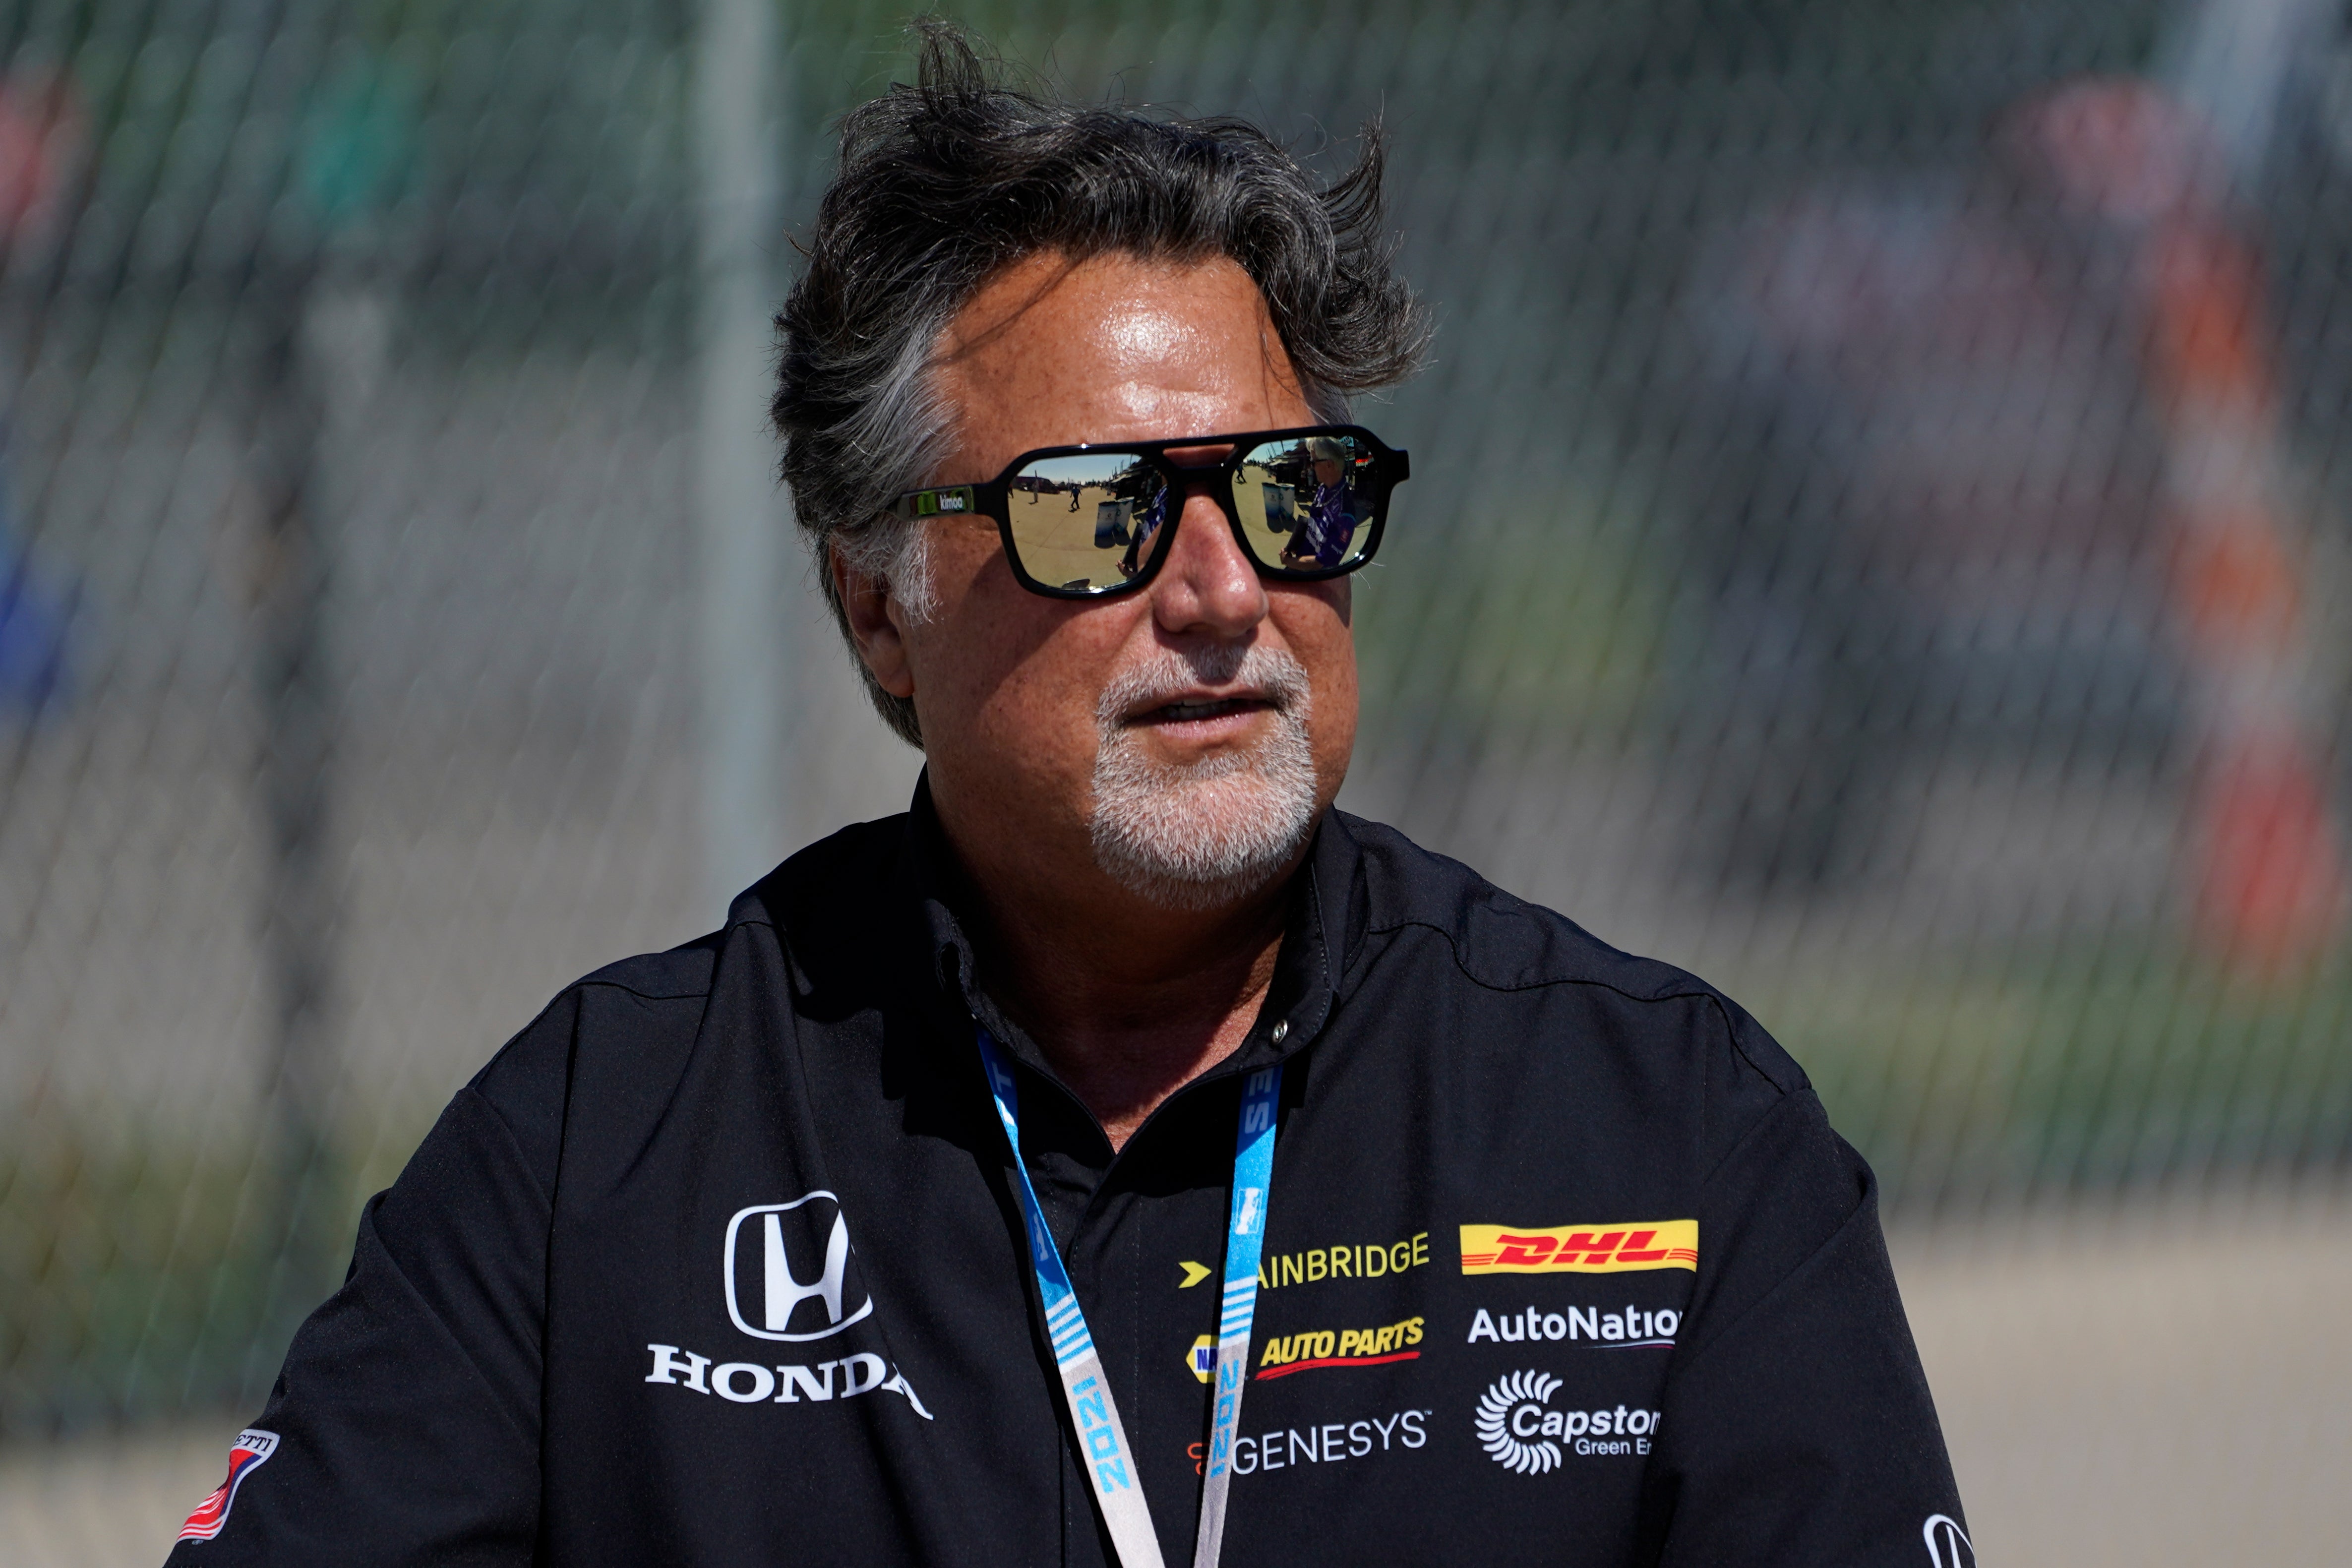 Michael Andretti still is still targeting an entry in F1 despite January’s setback